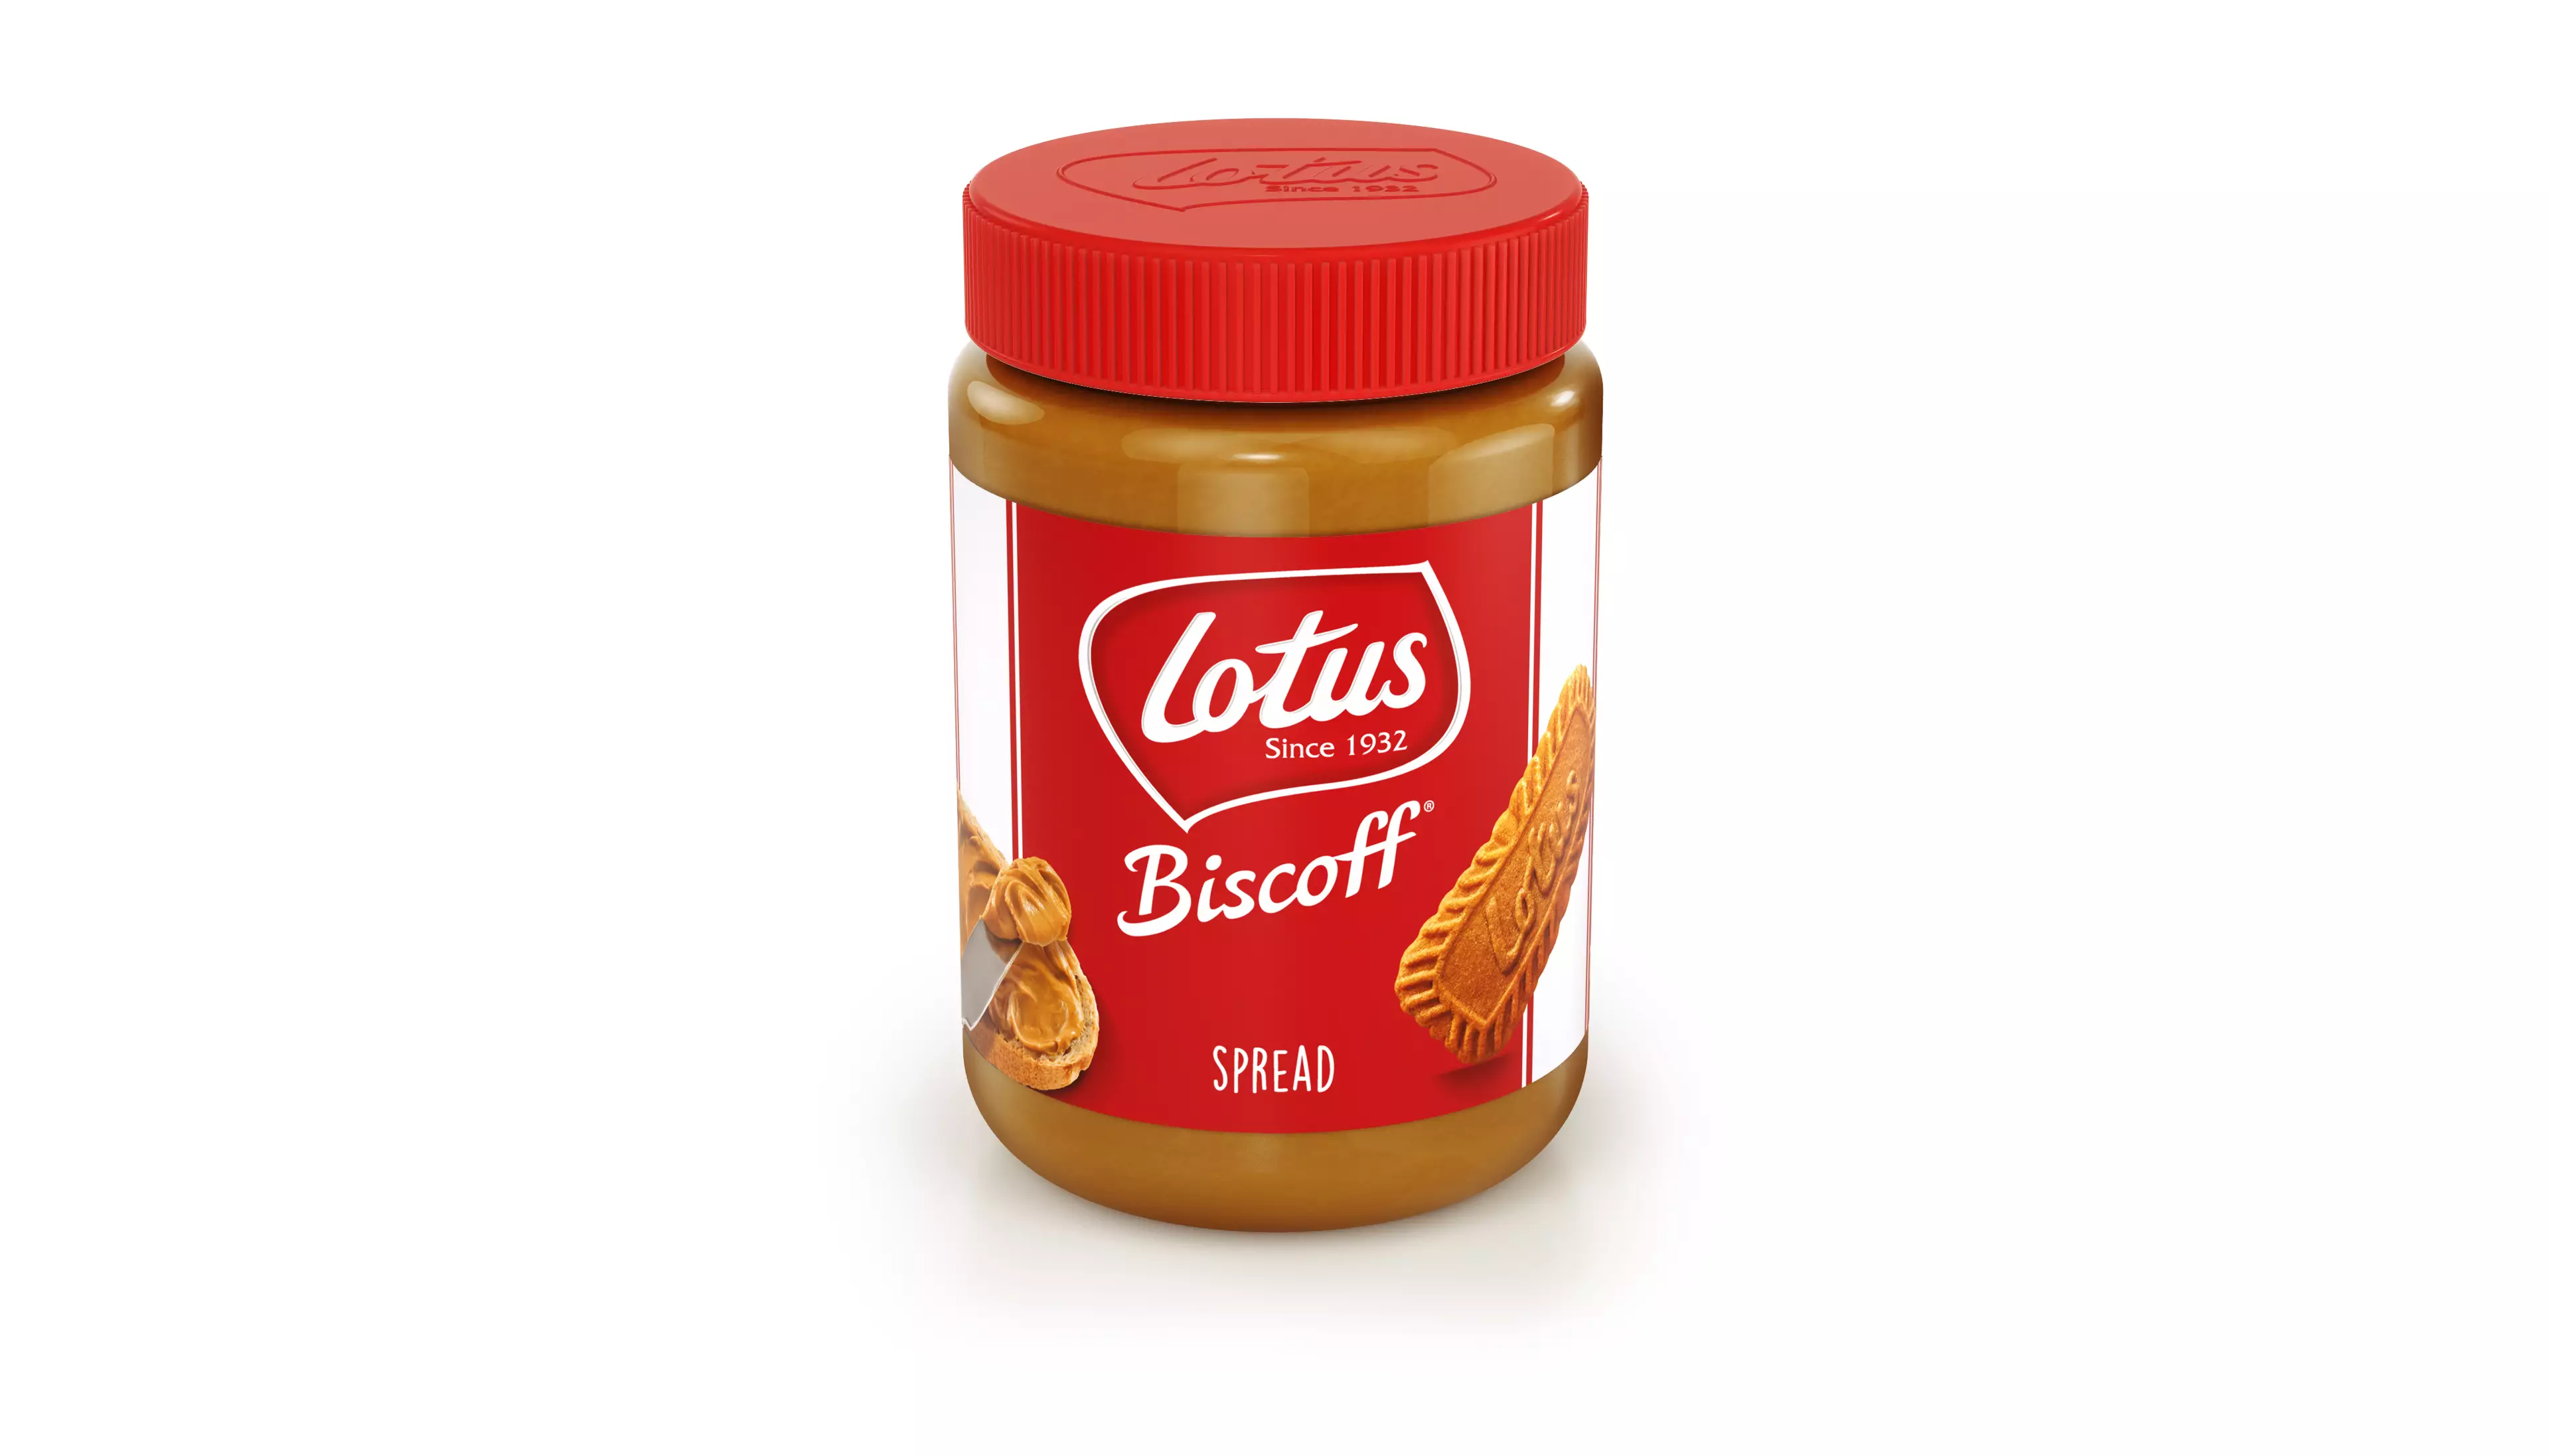 The huge tub contains 750g of delicious Biscoff spread (